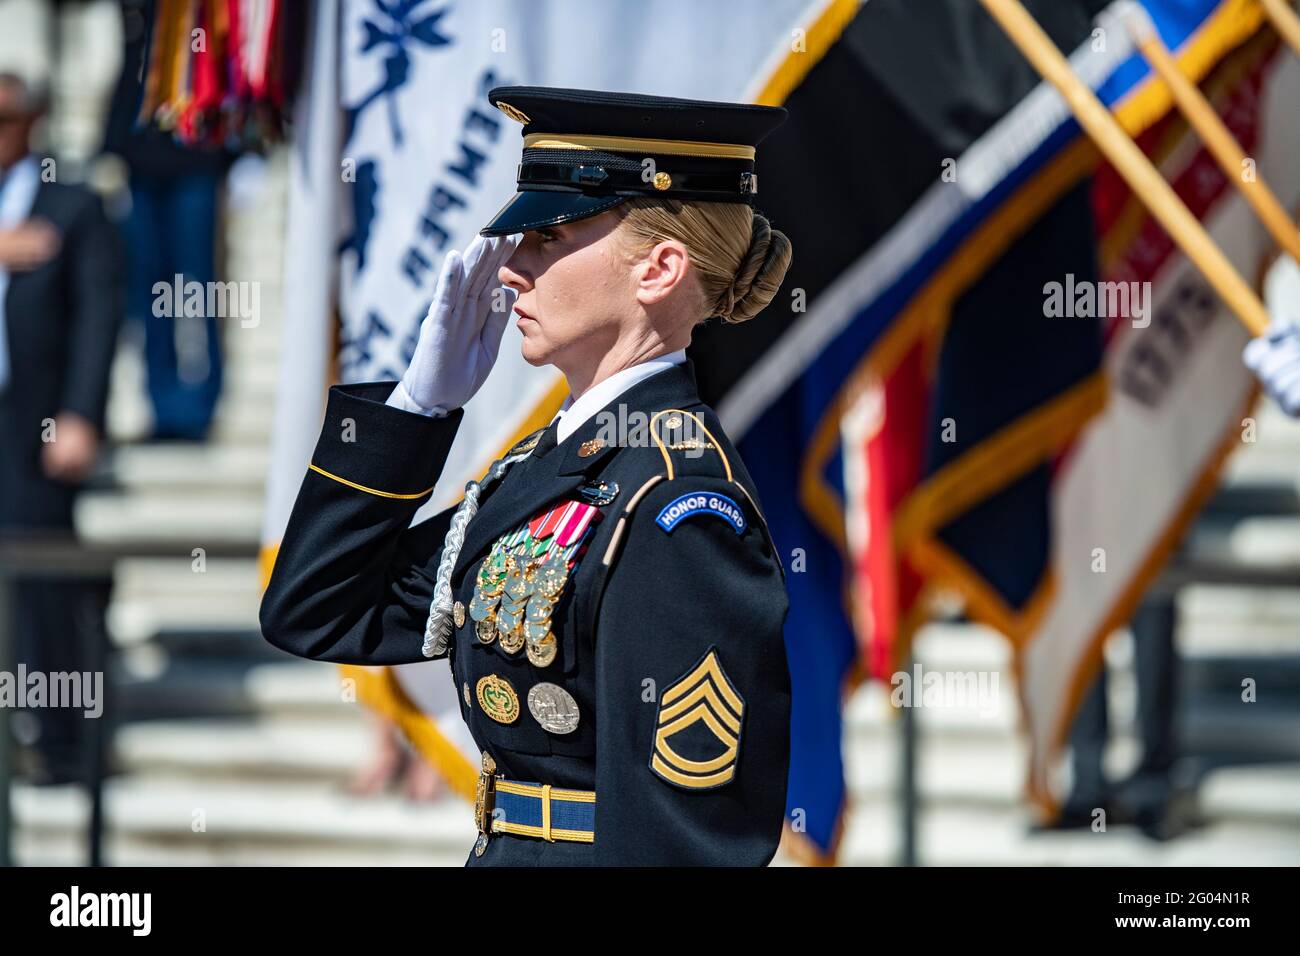 Arlington, United States Of America. 31st May, 2021. U.S. Army Sgt. 1st Class Chelsea Porterfield, Sergeant of the Guard at the Tomb of the Unknown Soldier, salutes during the Presidential Armed Forces Full Honors Wreath-Laying Ceremony at Arlington National Cemetery May 31, 2021 Arlington, Virginia. Credit: Planetpix/Alamy Live News Stock Photo